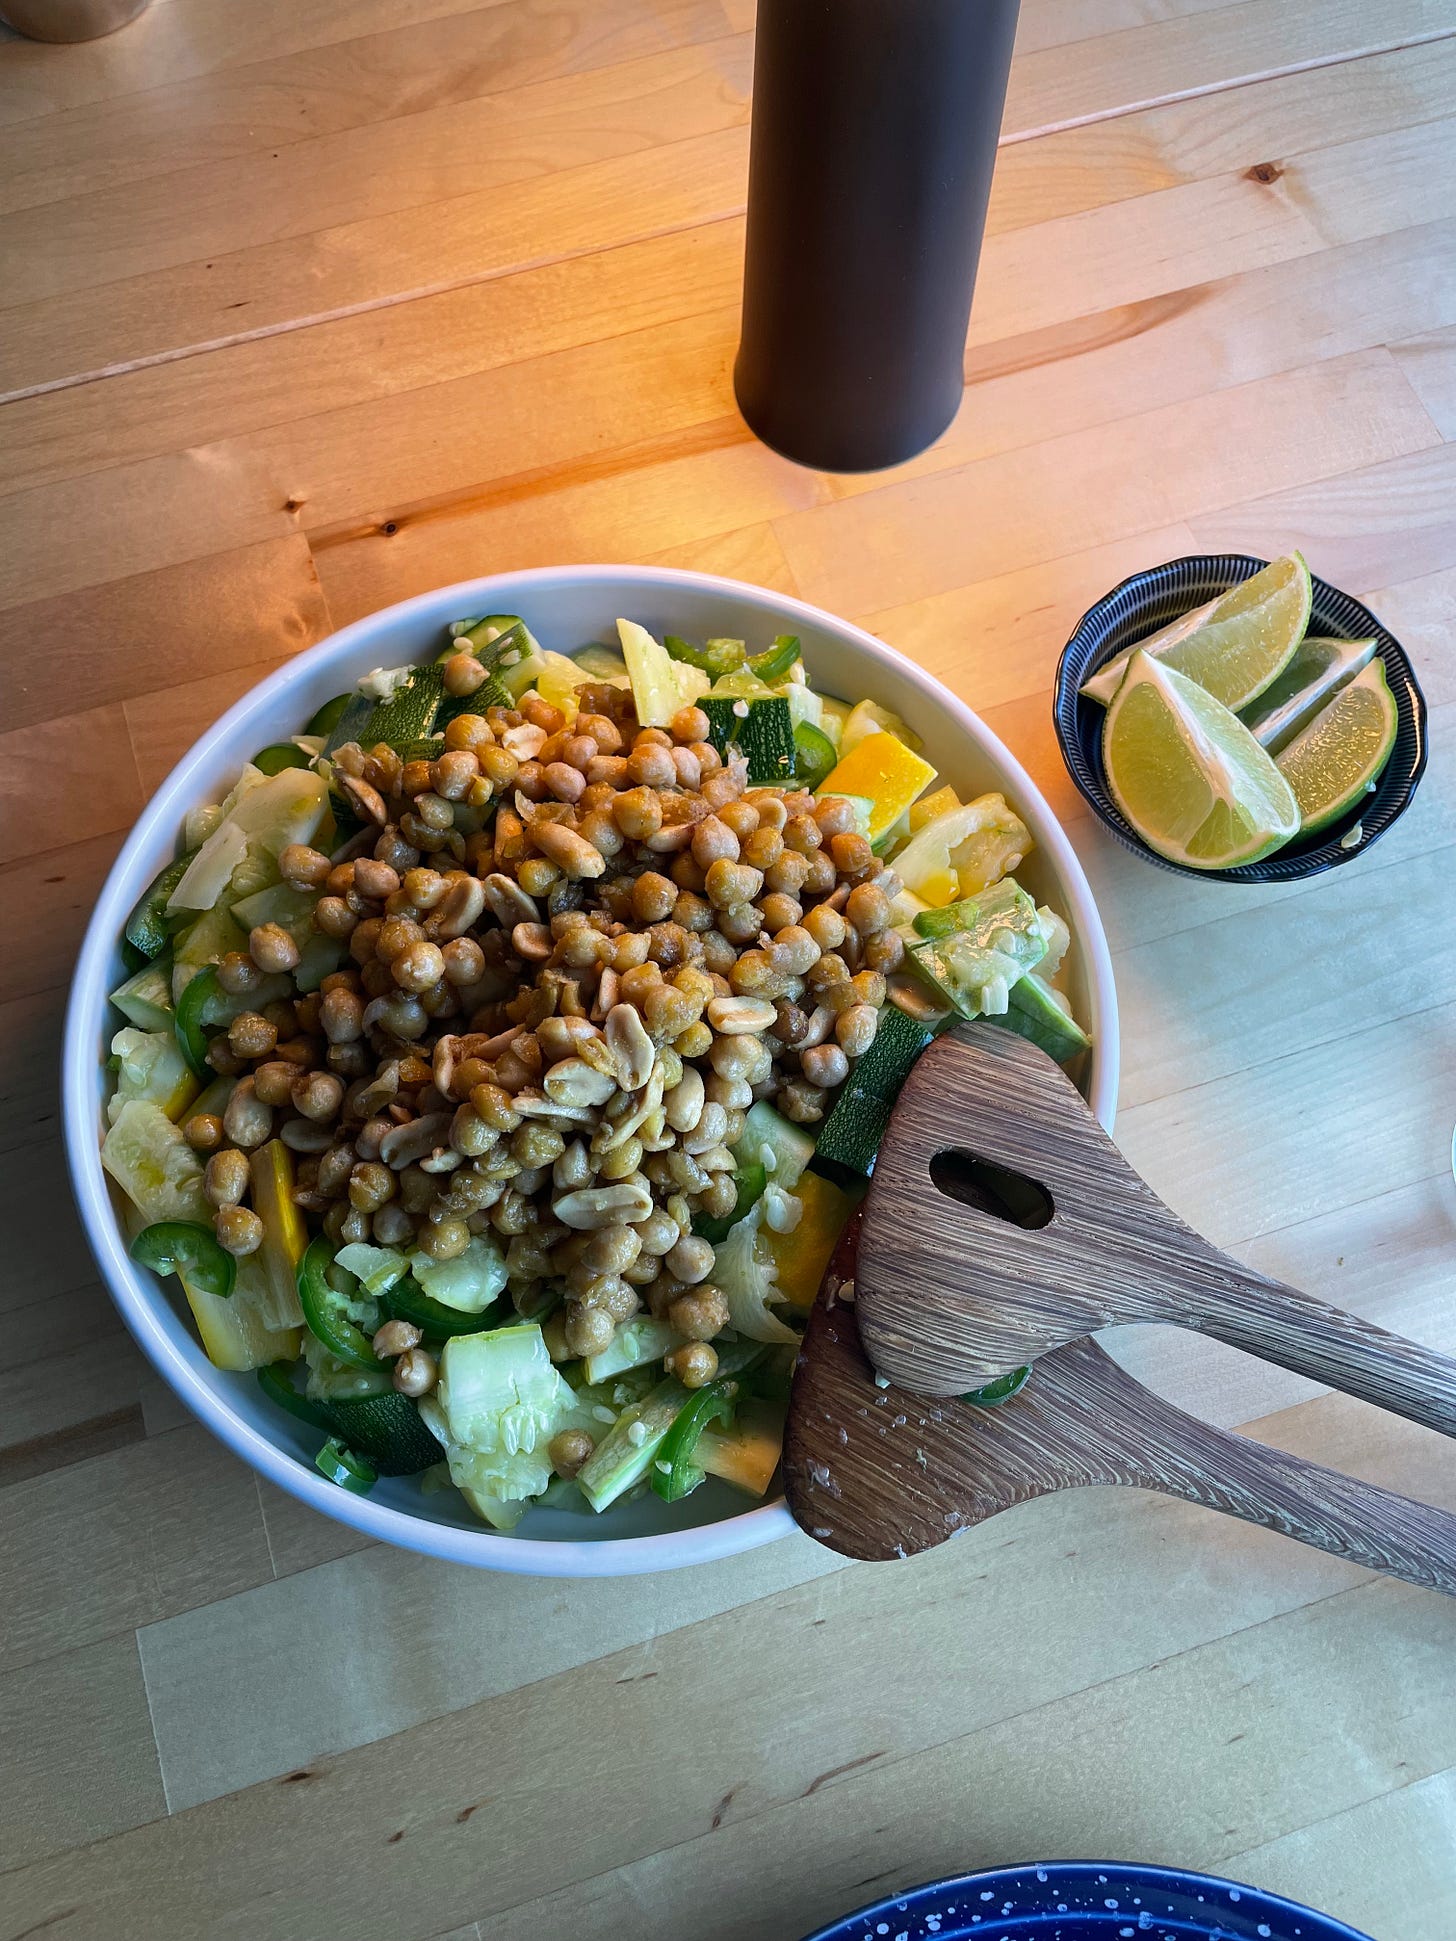 Zucchini salad in a white serving dish topped with fried chickpeas and peanuts, with a side of lime wedges